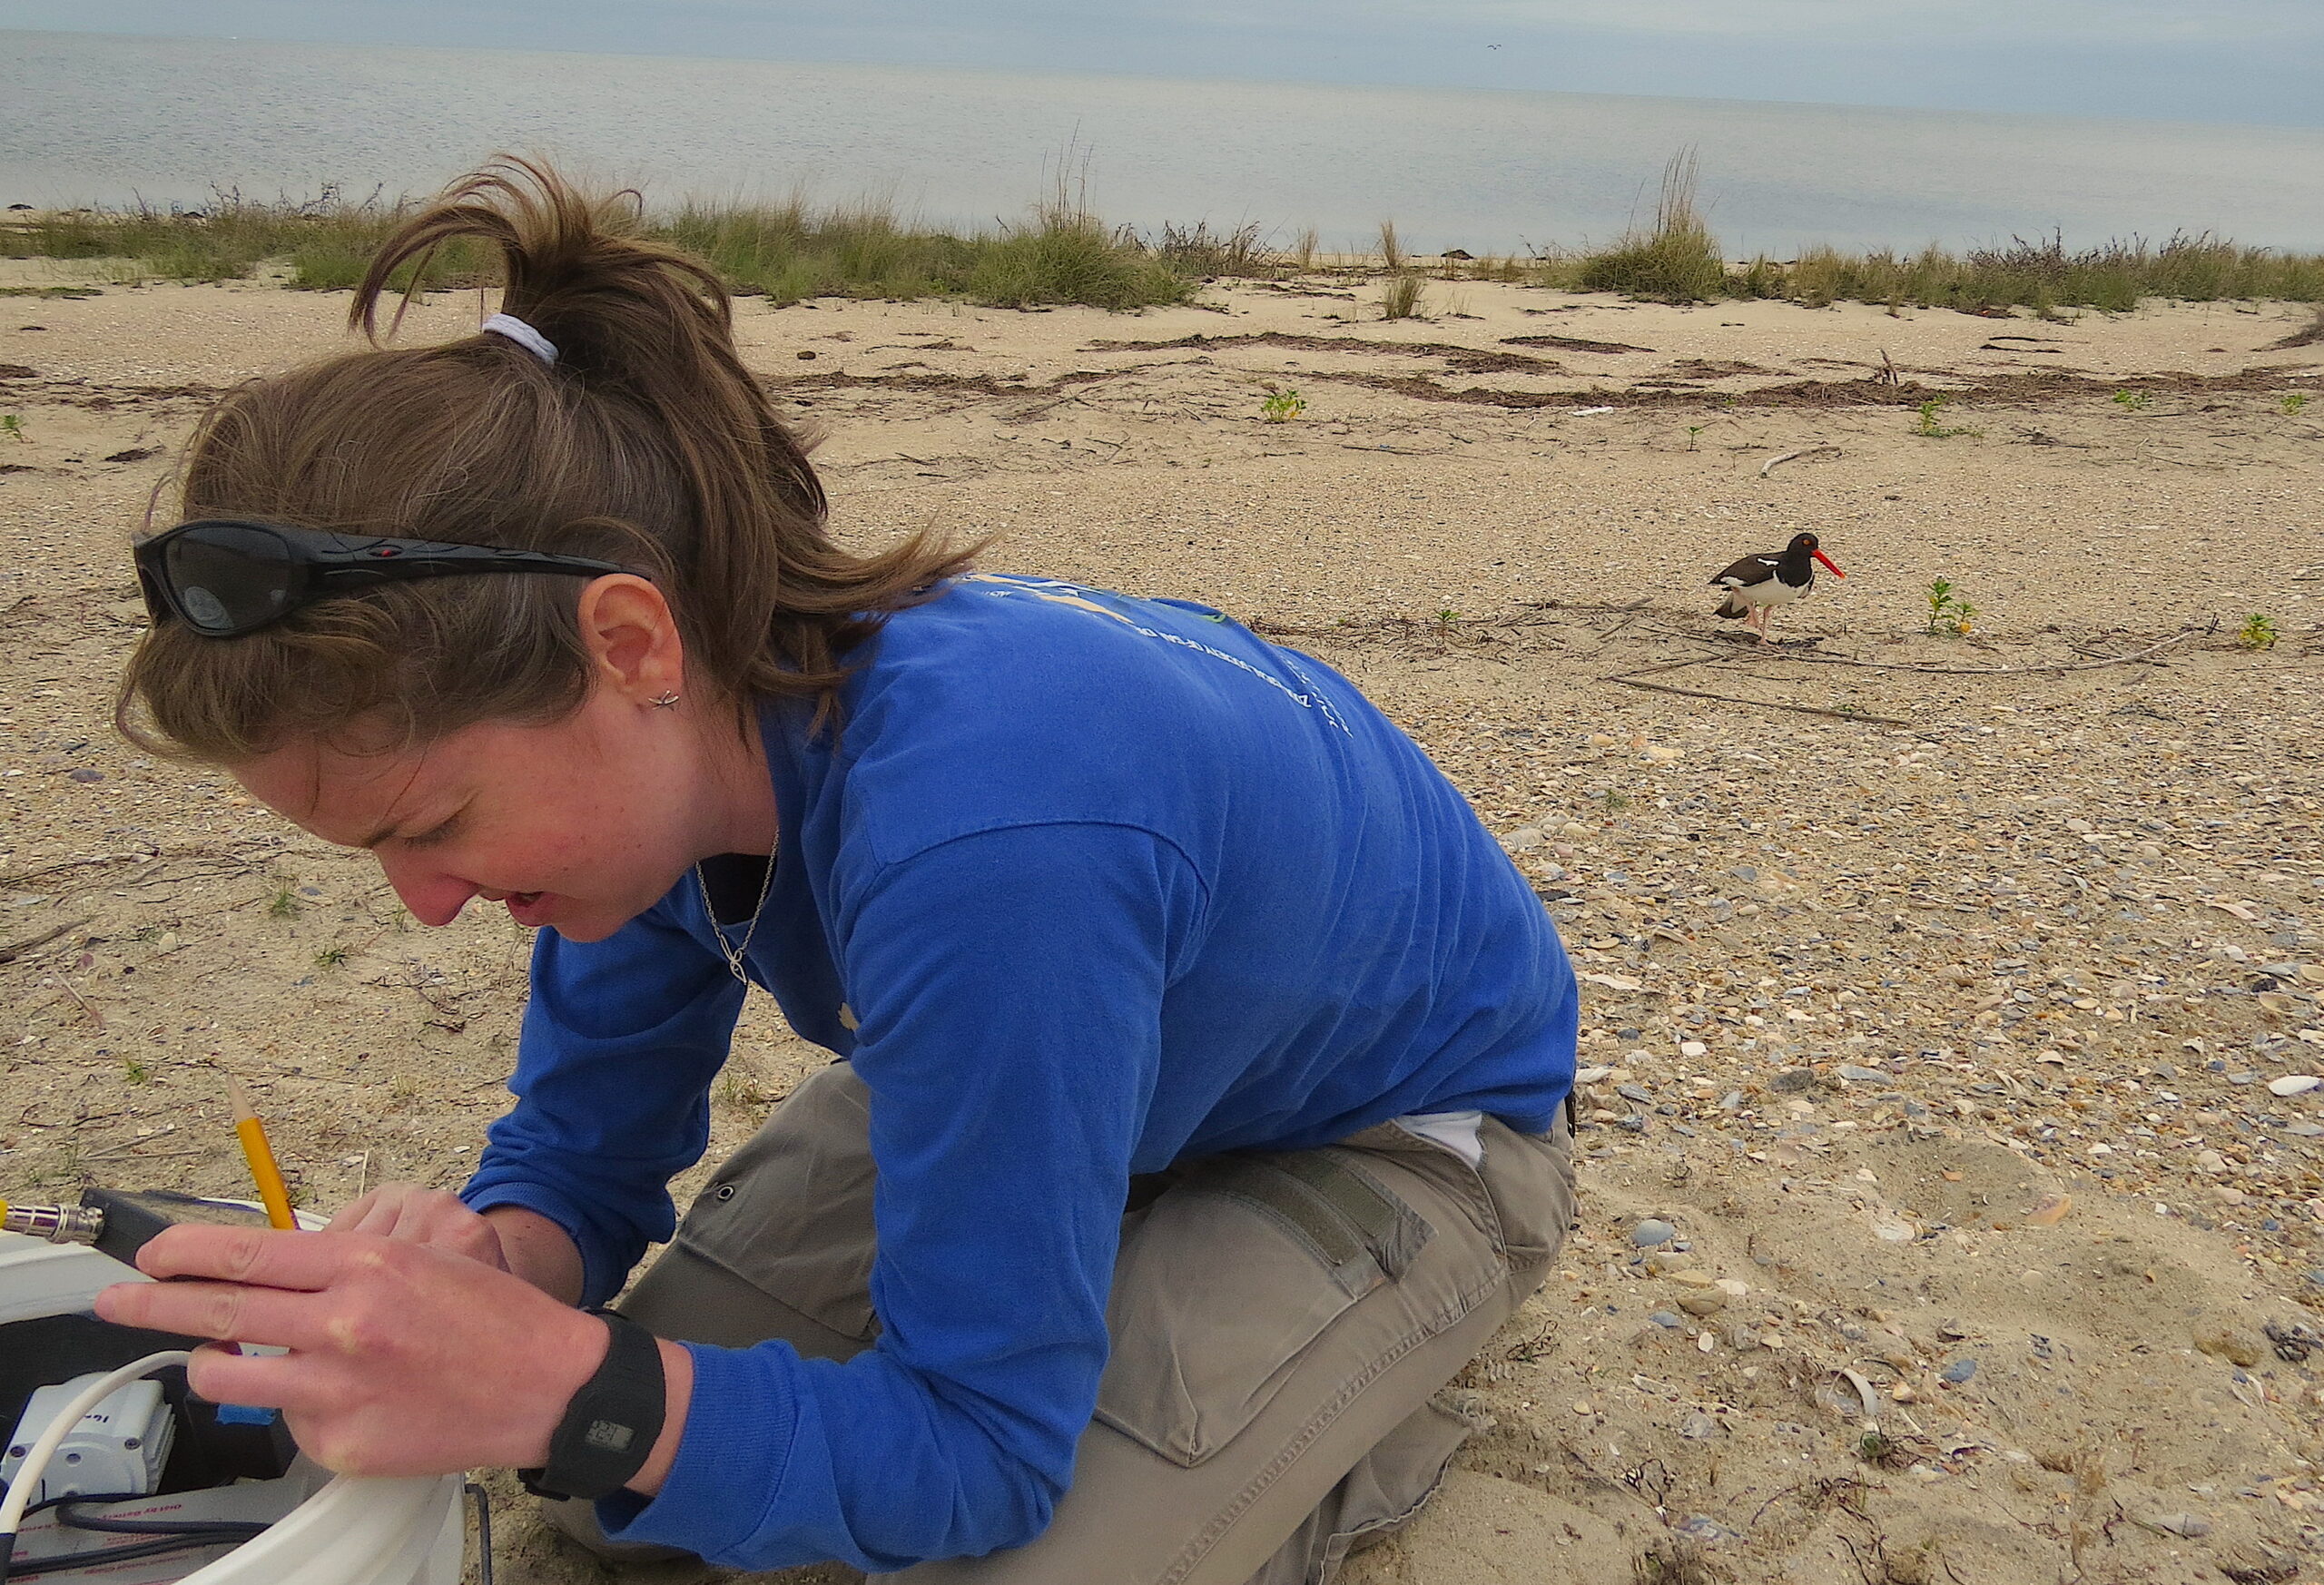 image: Shilo Felton prepares to monitor and document oystercatchers on Cape Hatteras National Seashore, while one of her study’s subjects looks on. Credit: Tracy Borneman/NC State University.